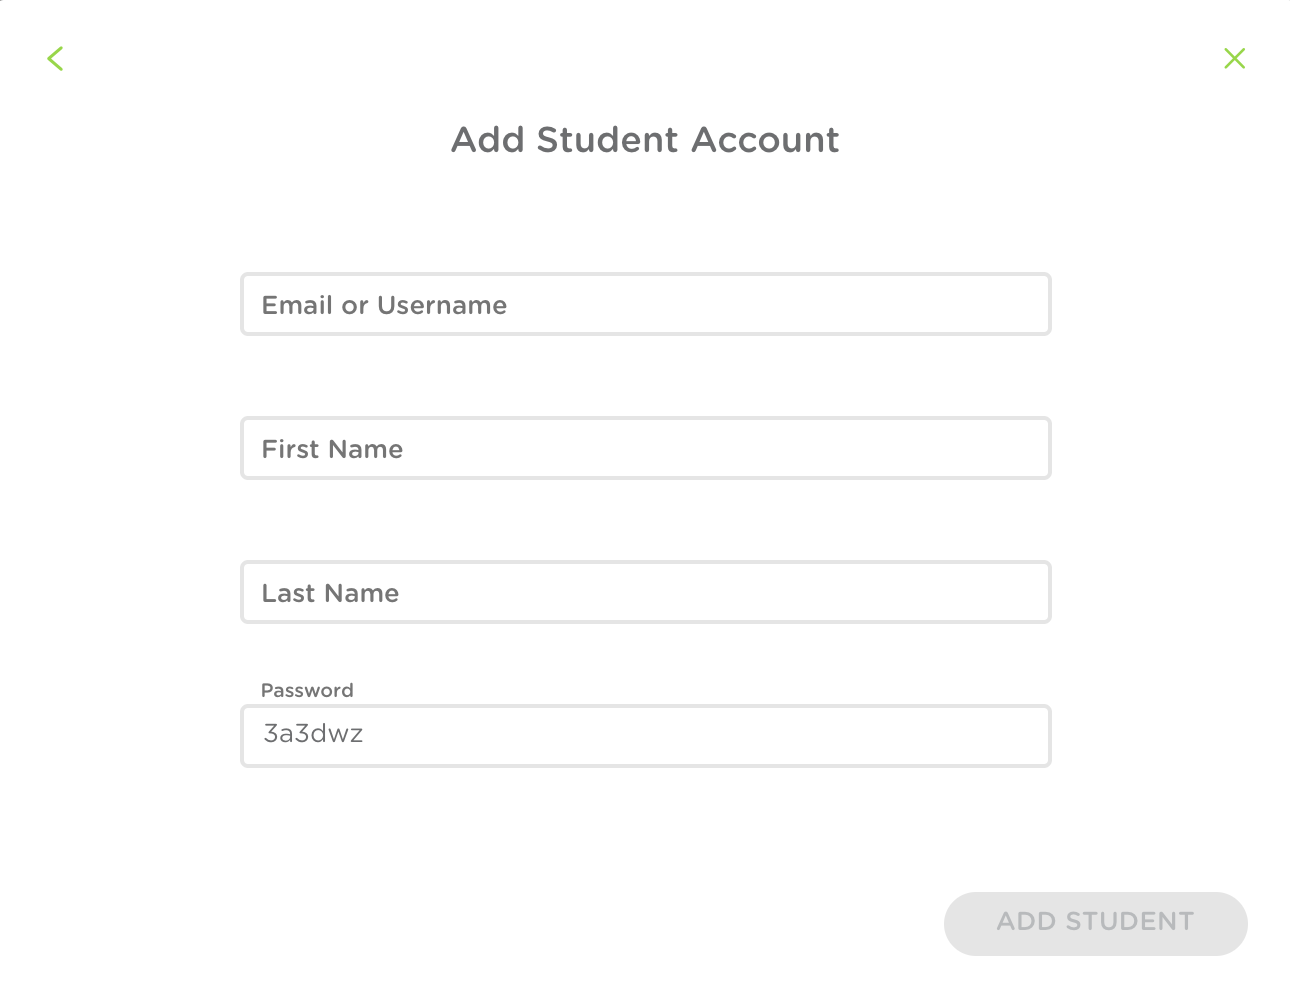 The Add student account information window.